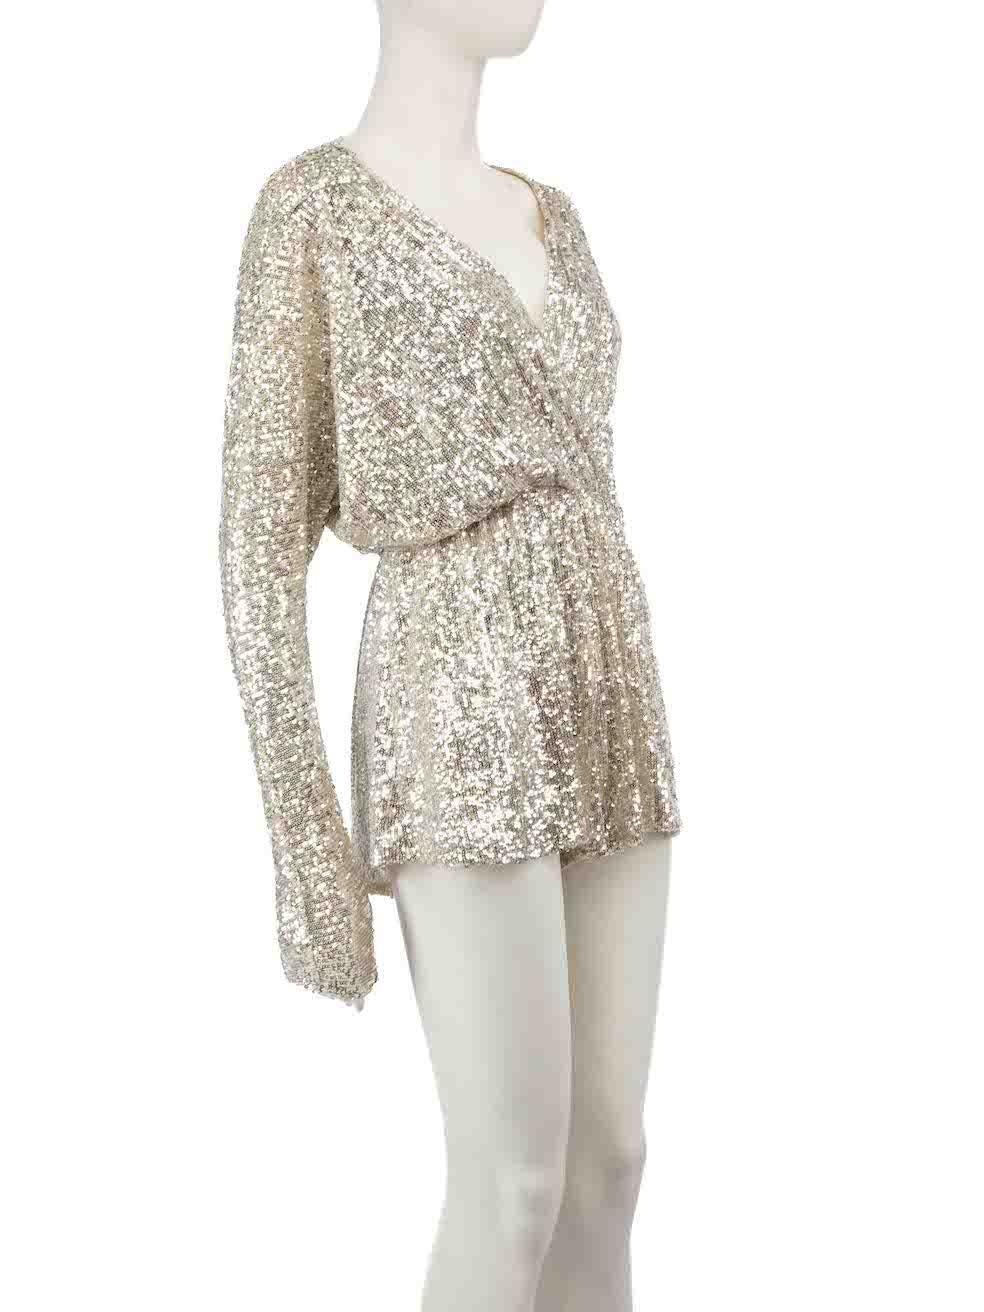 CONDITION is Never worn, with tags. No visible wear to playsuit is evident on this new Maje designer resale item.
 
 
 
 Details
 
 
 Silver
 
 Polyester
 
 Playsuit
 
 Sequinned
 
 Long sleeves
 
 V neckline
 
 Front snap button closure
 
